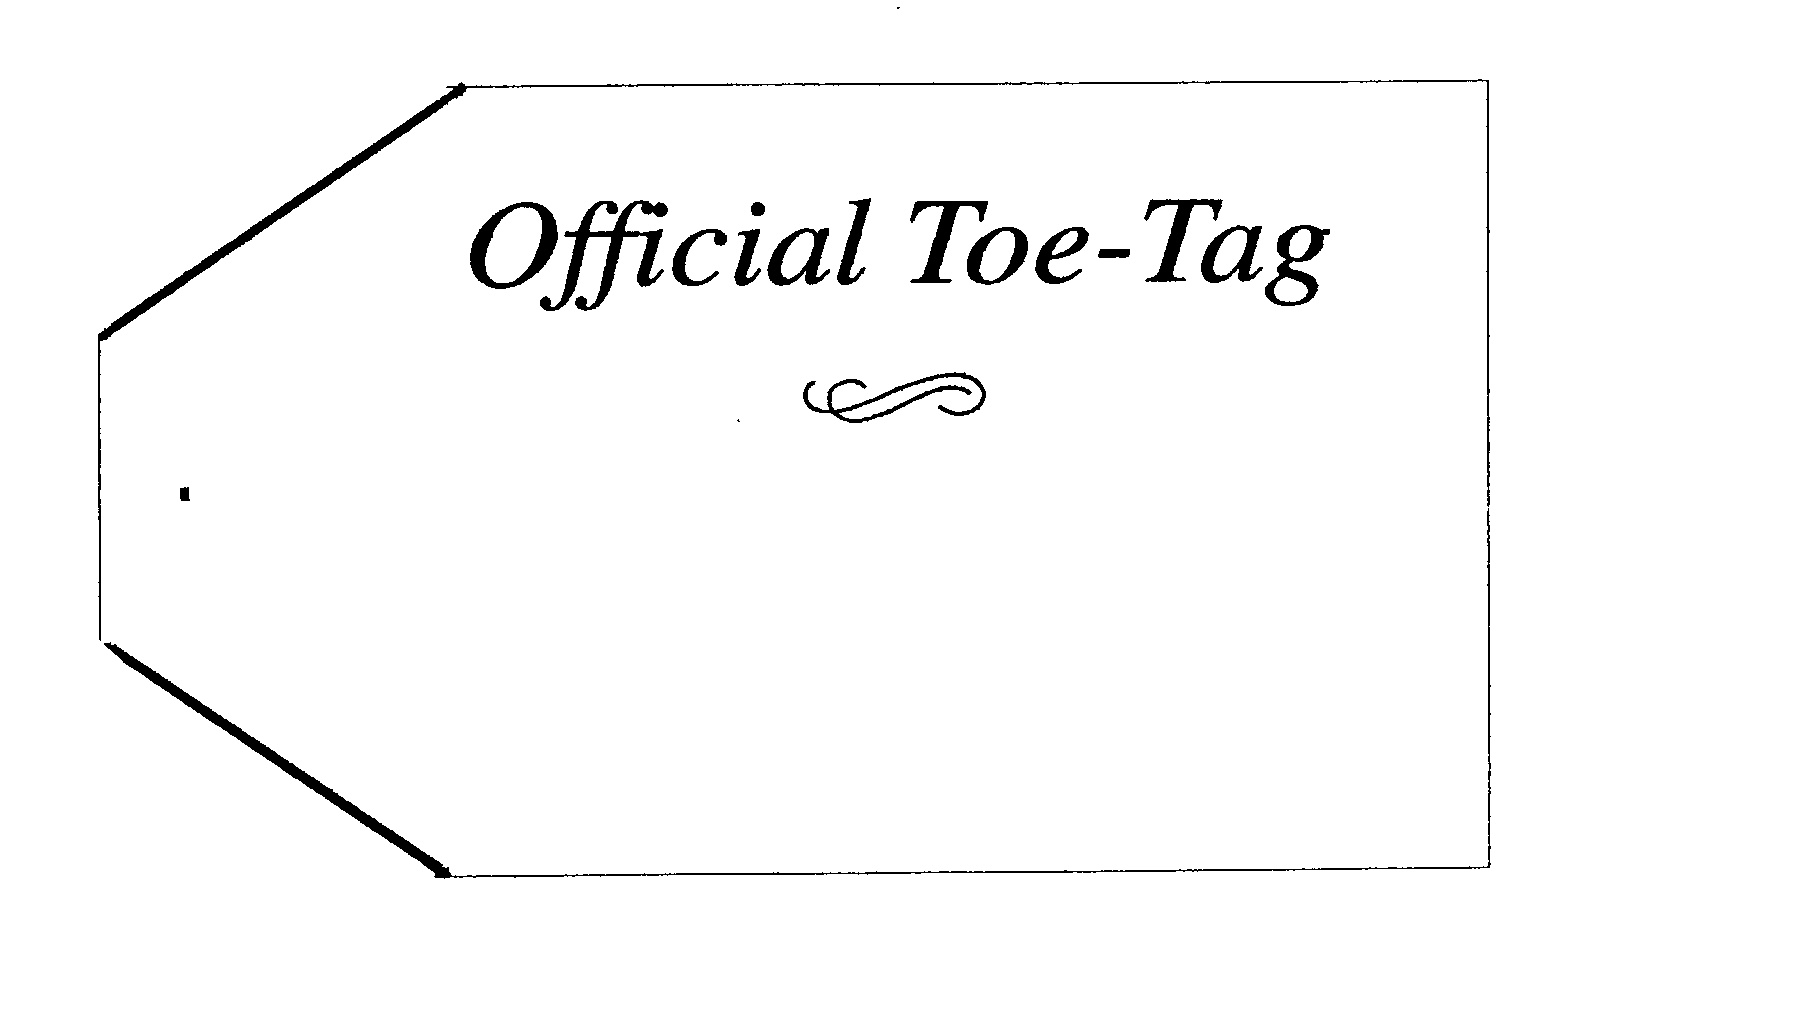 OFFICIAL TOE-TAG